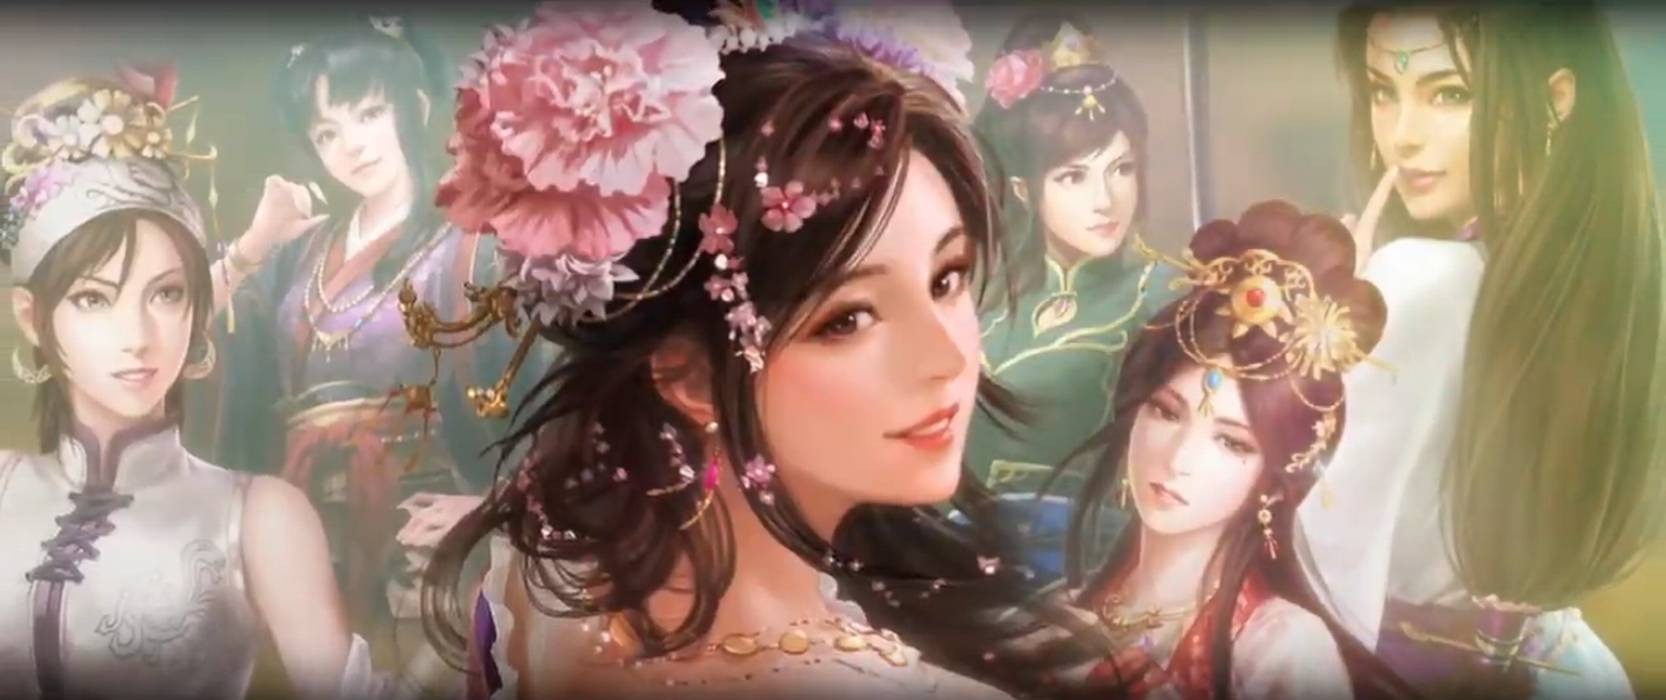 Romance of the Three Kingdoms XIV Announces Anime and Game Collaboration DLCs